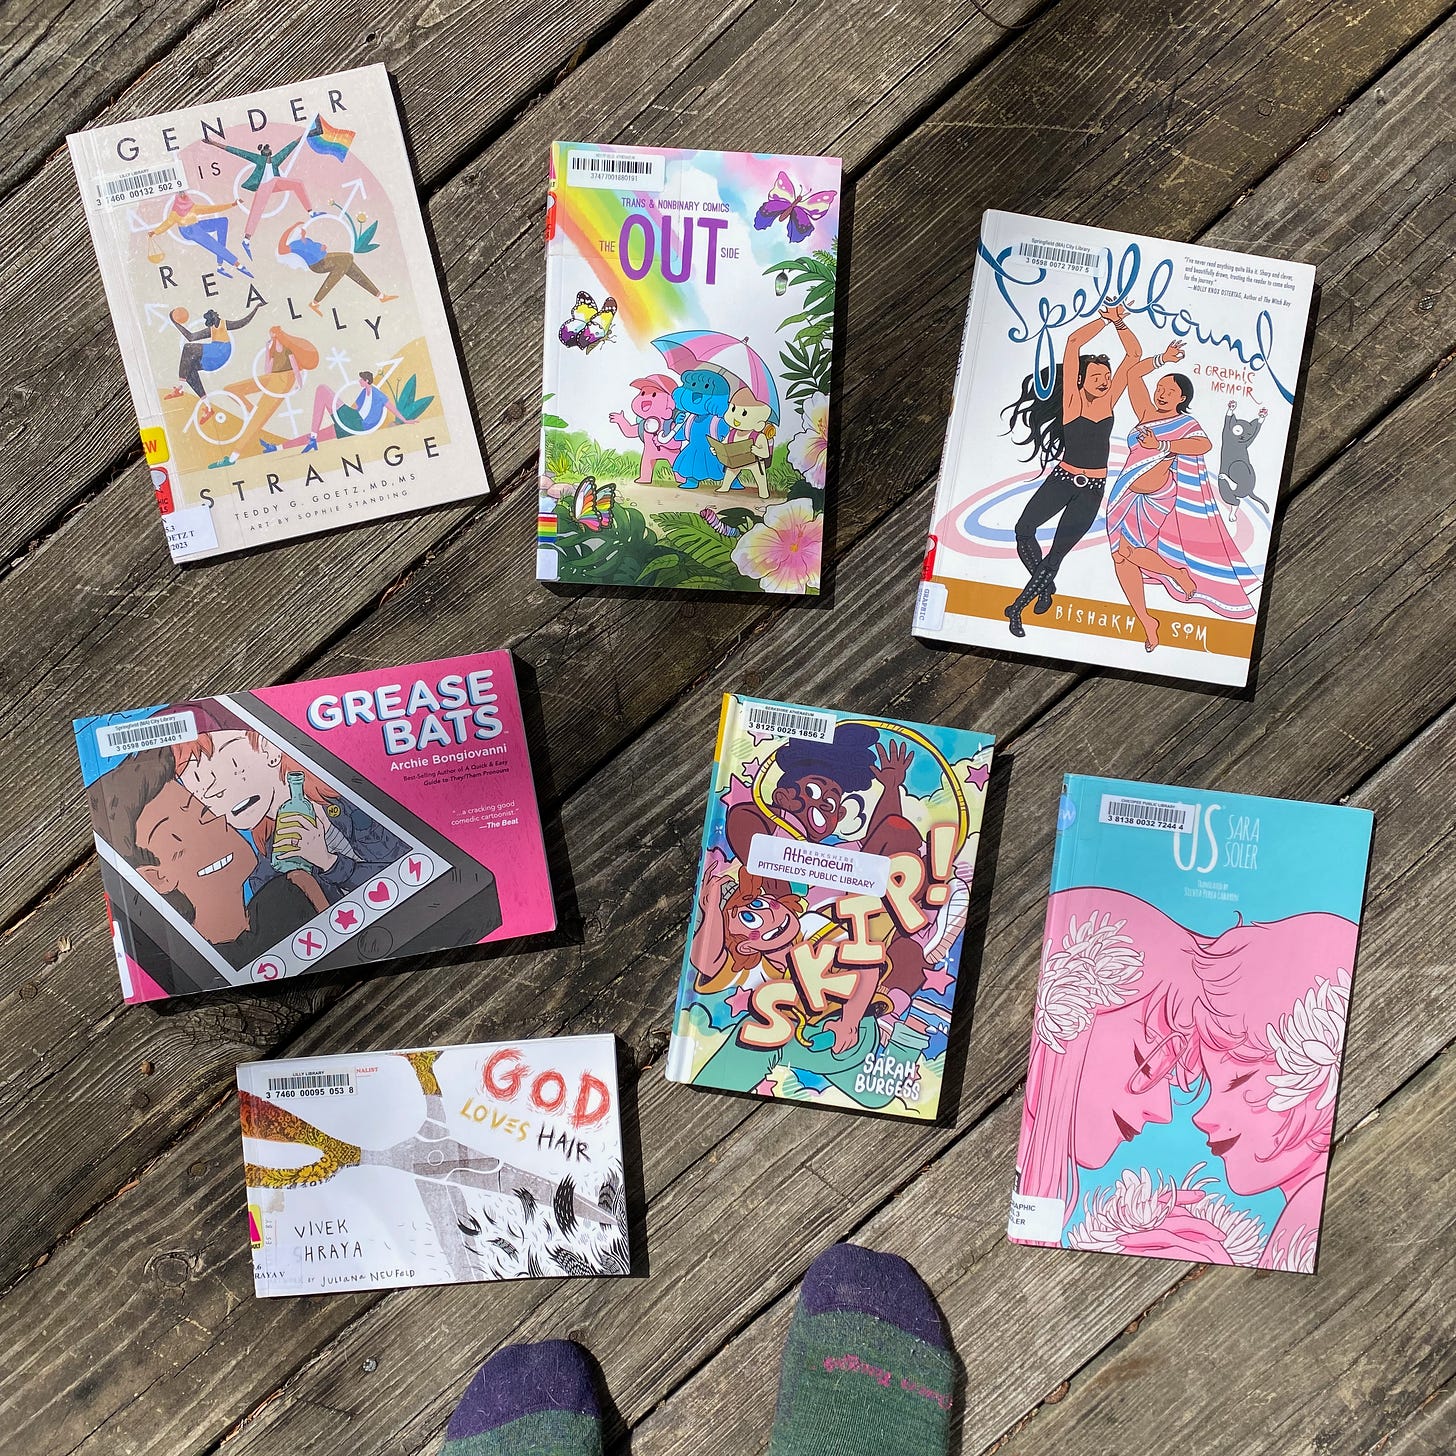 The following books spread out on a porch next to my socked feet: Gender is Really Strange, The Out Side: Trans & Nonbinary Comics, Spellbound, Us, Grease Bats, God Loves Hair, and Skip!